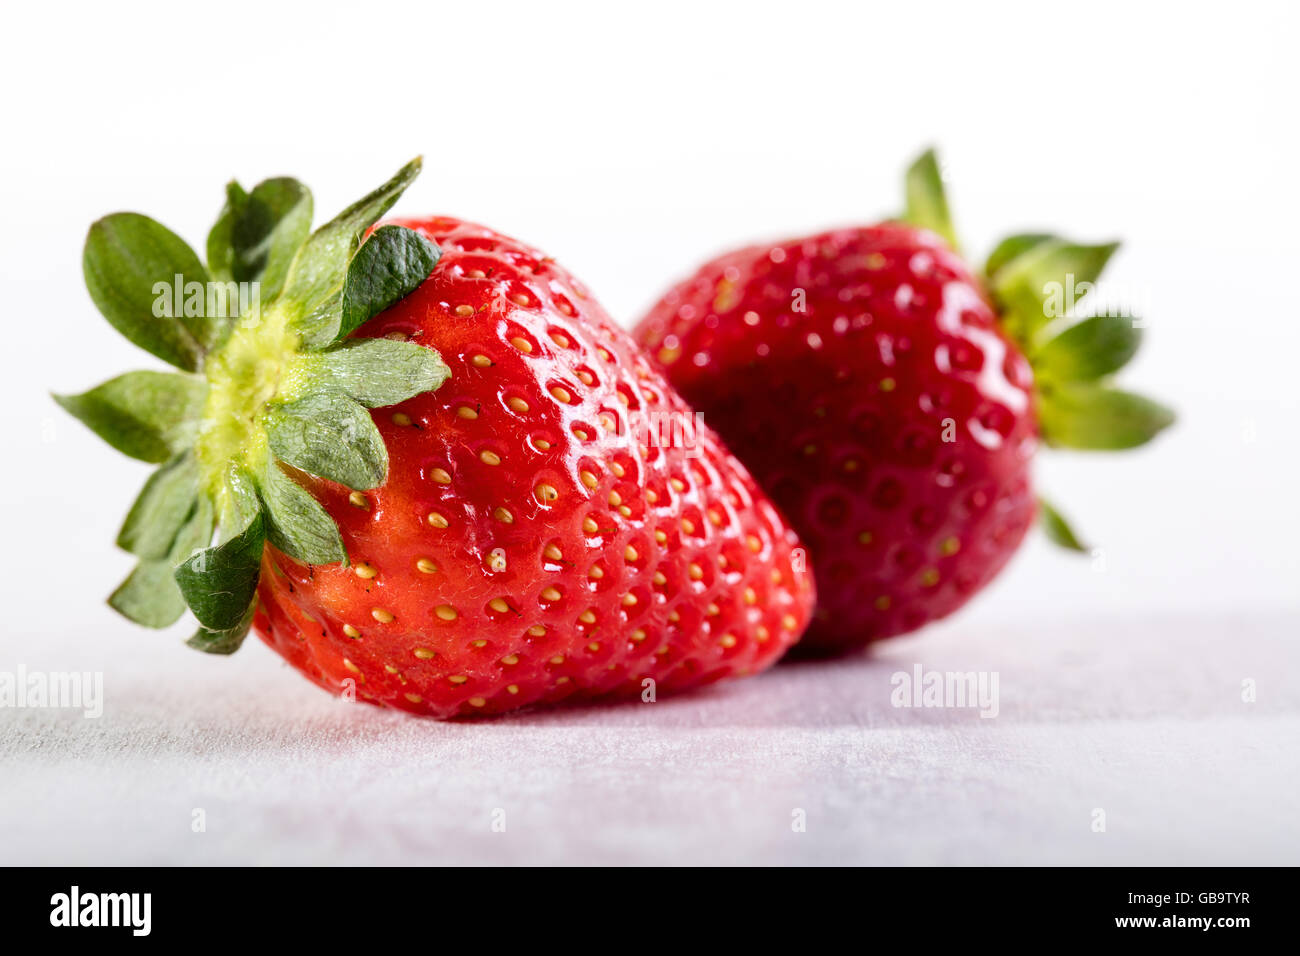 Two juicy strawberry on the table Stock Photo